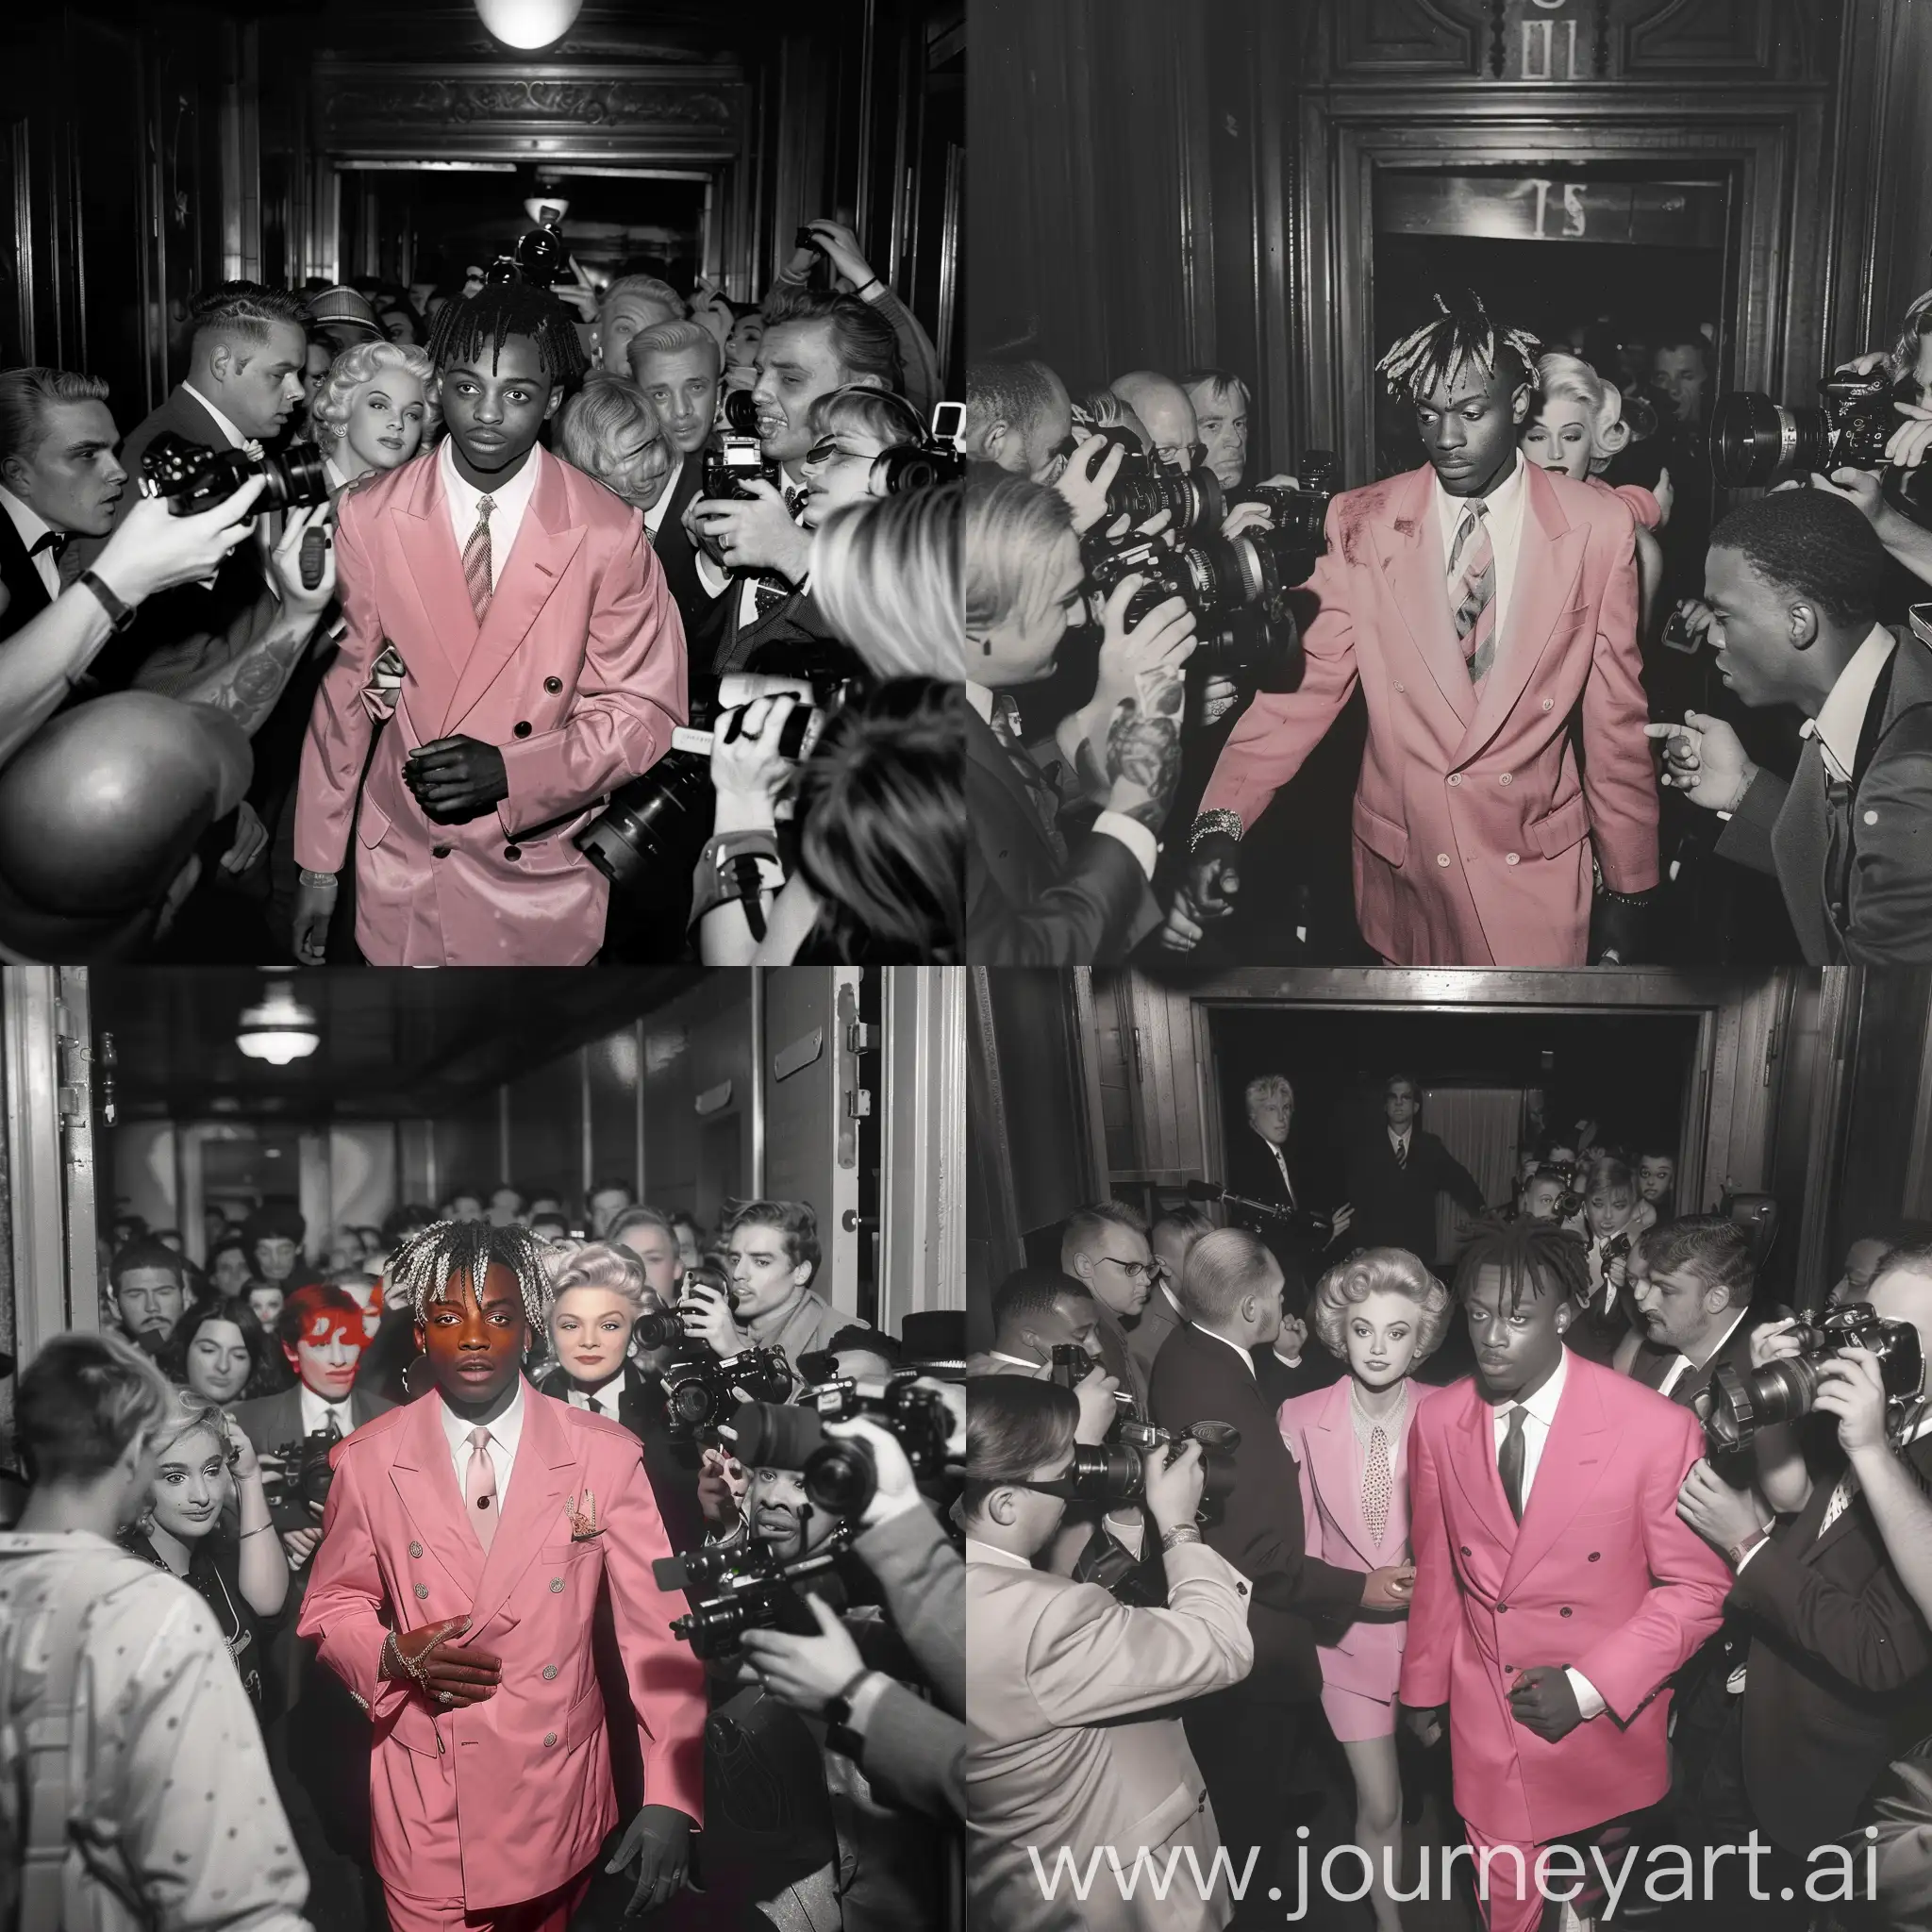 Juice-WRLD-and-Marilyn-Monroe-Exiting-Theatre-in-Pink-Suit-Surrounded-by-Paparazzi